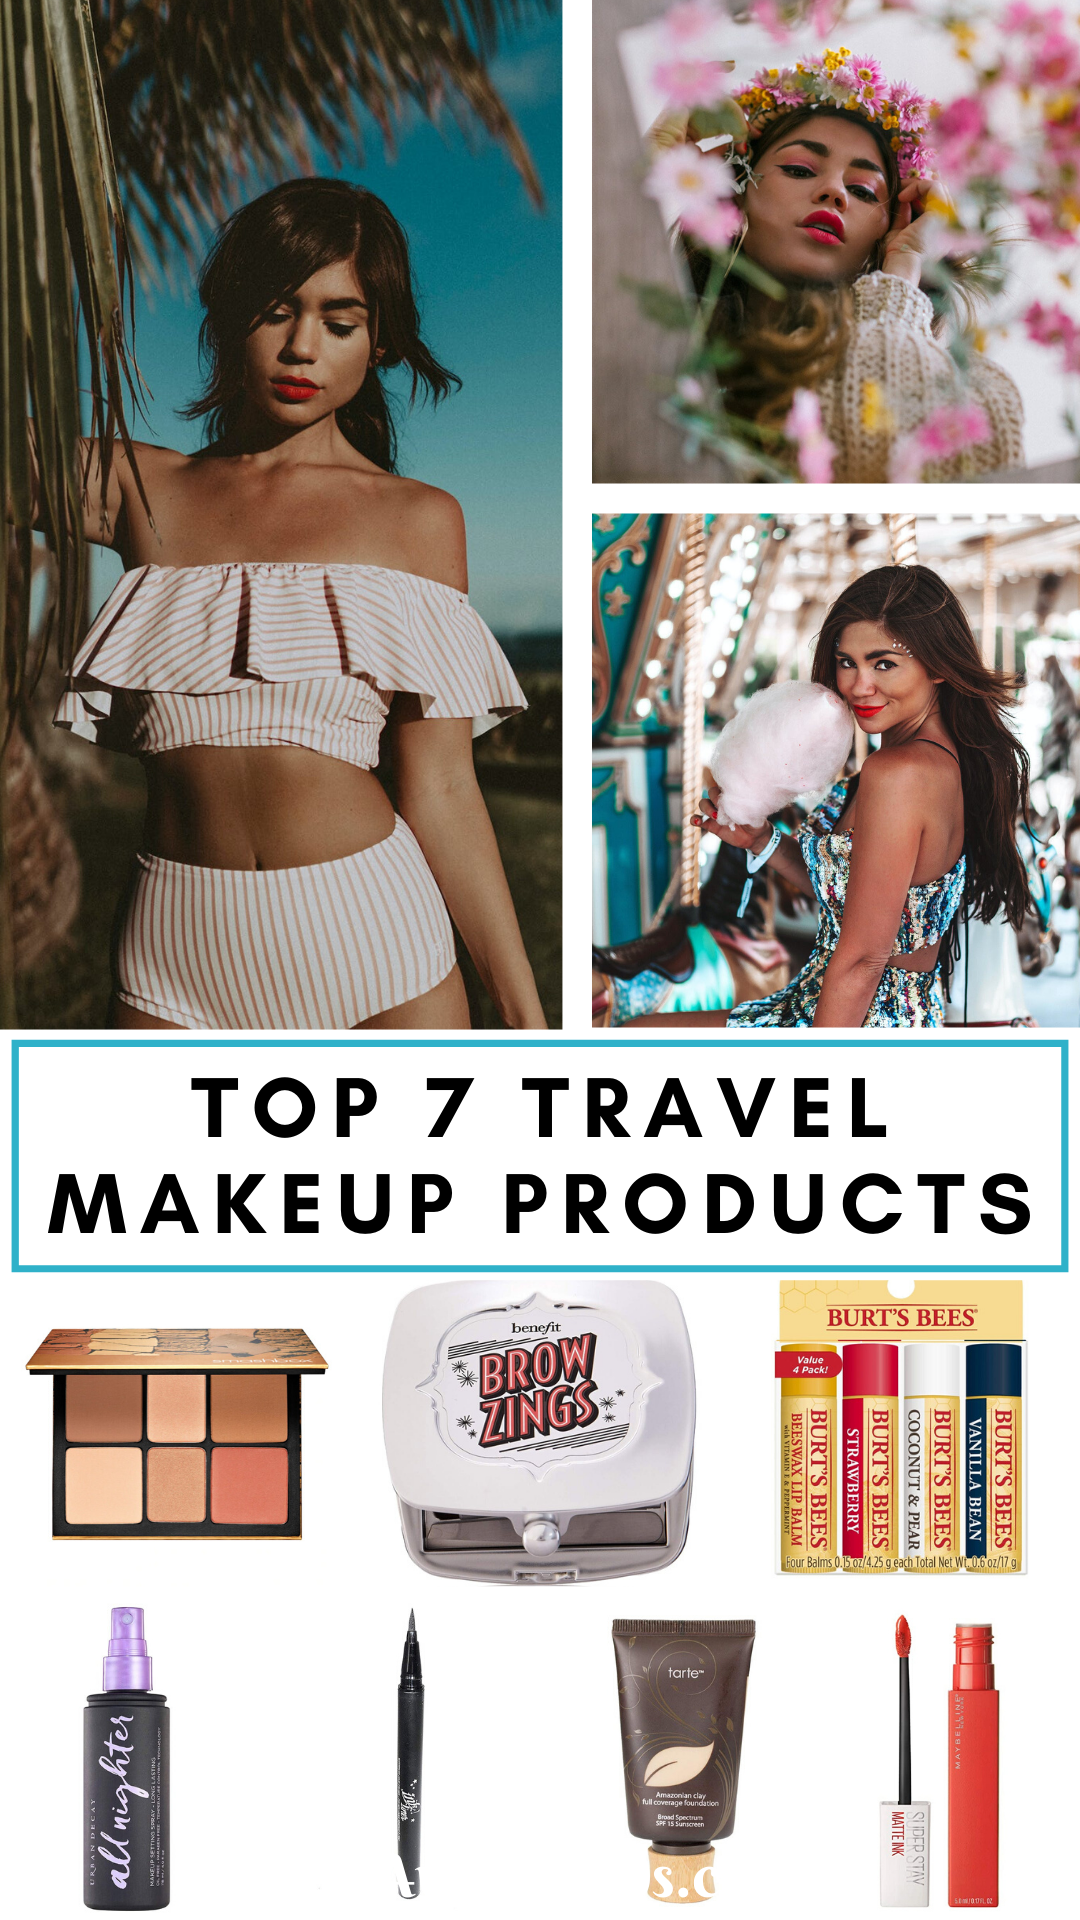 These are the 7 best makeup products I have found for travel. I look for products that are waterproof, long-lasting, reliable products that are easy to use and worth every cent! #beauty #makeup #beautyproducts | best makeup products | travel makeup essentials | travel makeup bag essentials | travel makeup kit | travel makeup best | travel makeup products | travel makeup list | travel makeup essential beauty products | whats in my travel makeup bag | must have makeup products